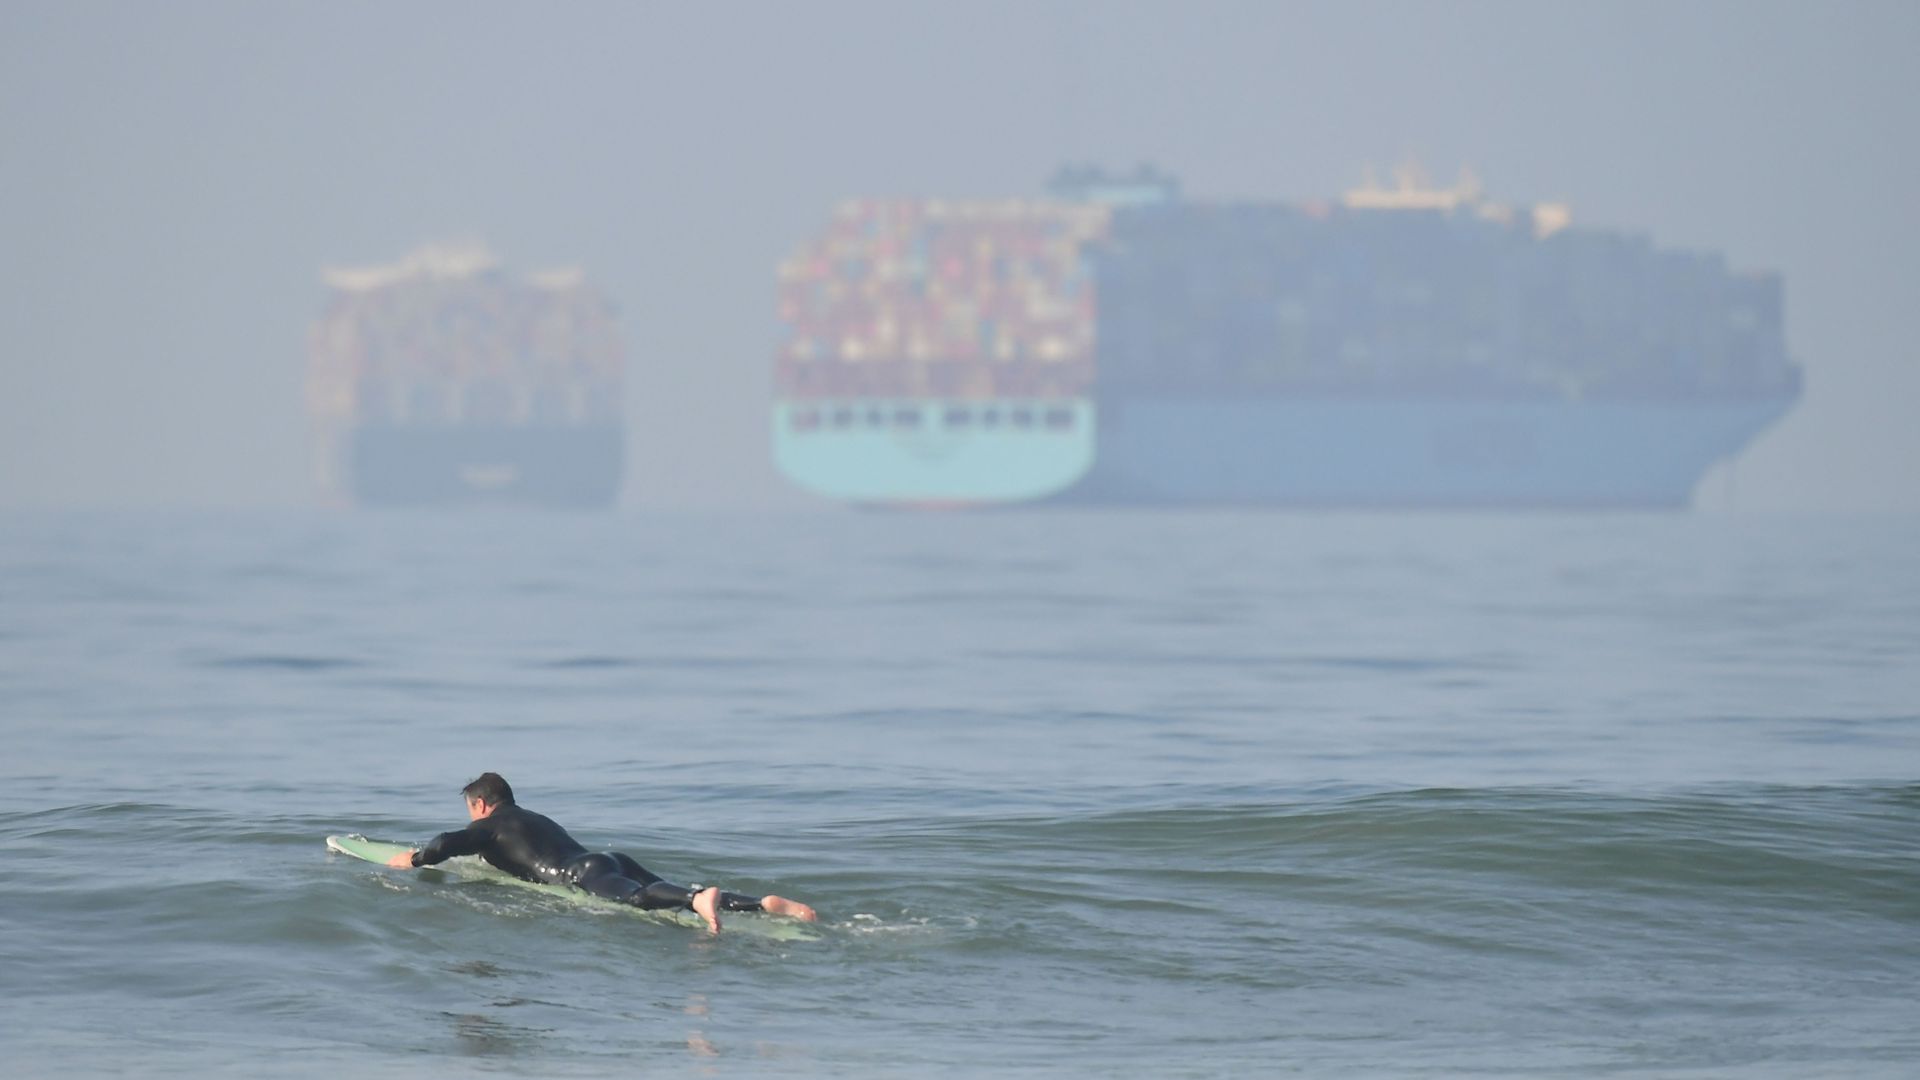 A surfer paddles in front of cargo ships